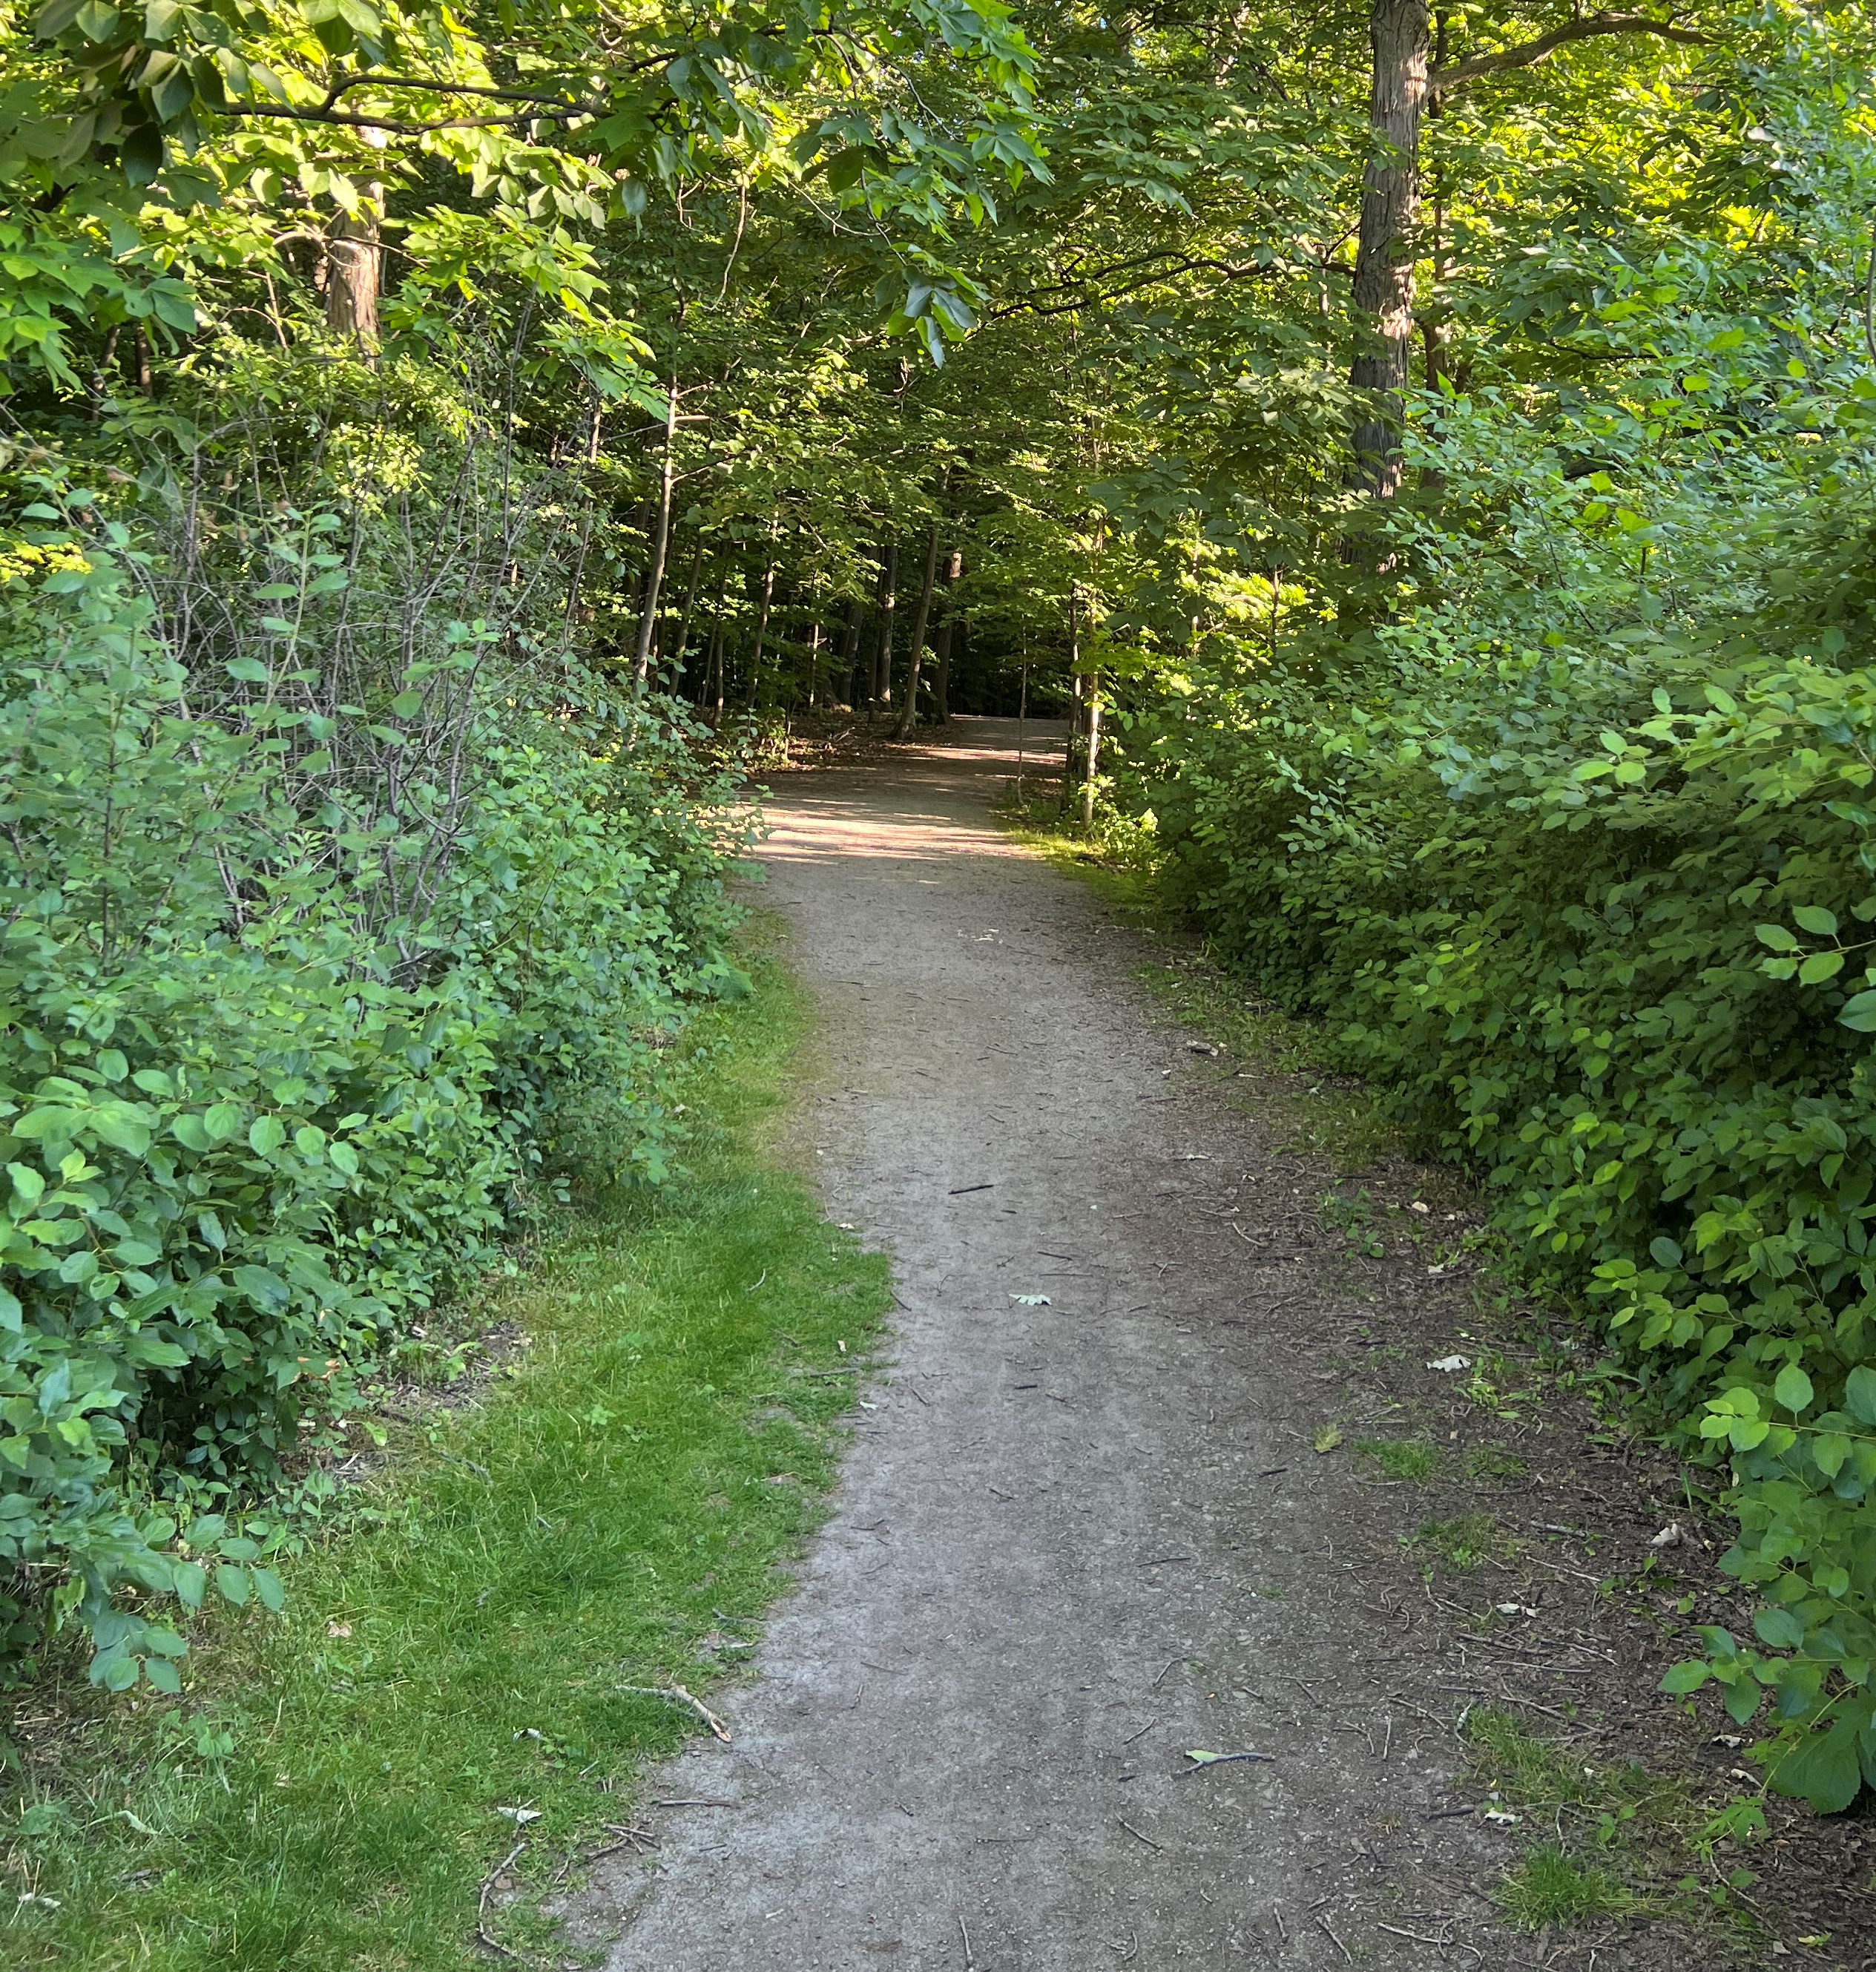 McCraney Creek trail | The section of McCraney Creek trail at Kingsridge Drive where Marie DiGiovine came face to face with what she believes was a black cougar around 8:30 p.m. July 6, 2022. | Marie DiGiovine